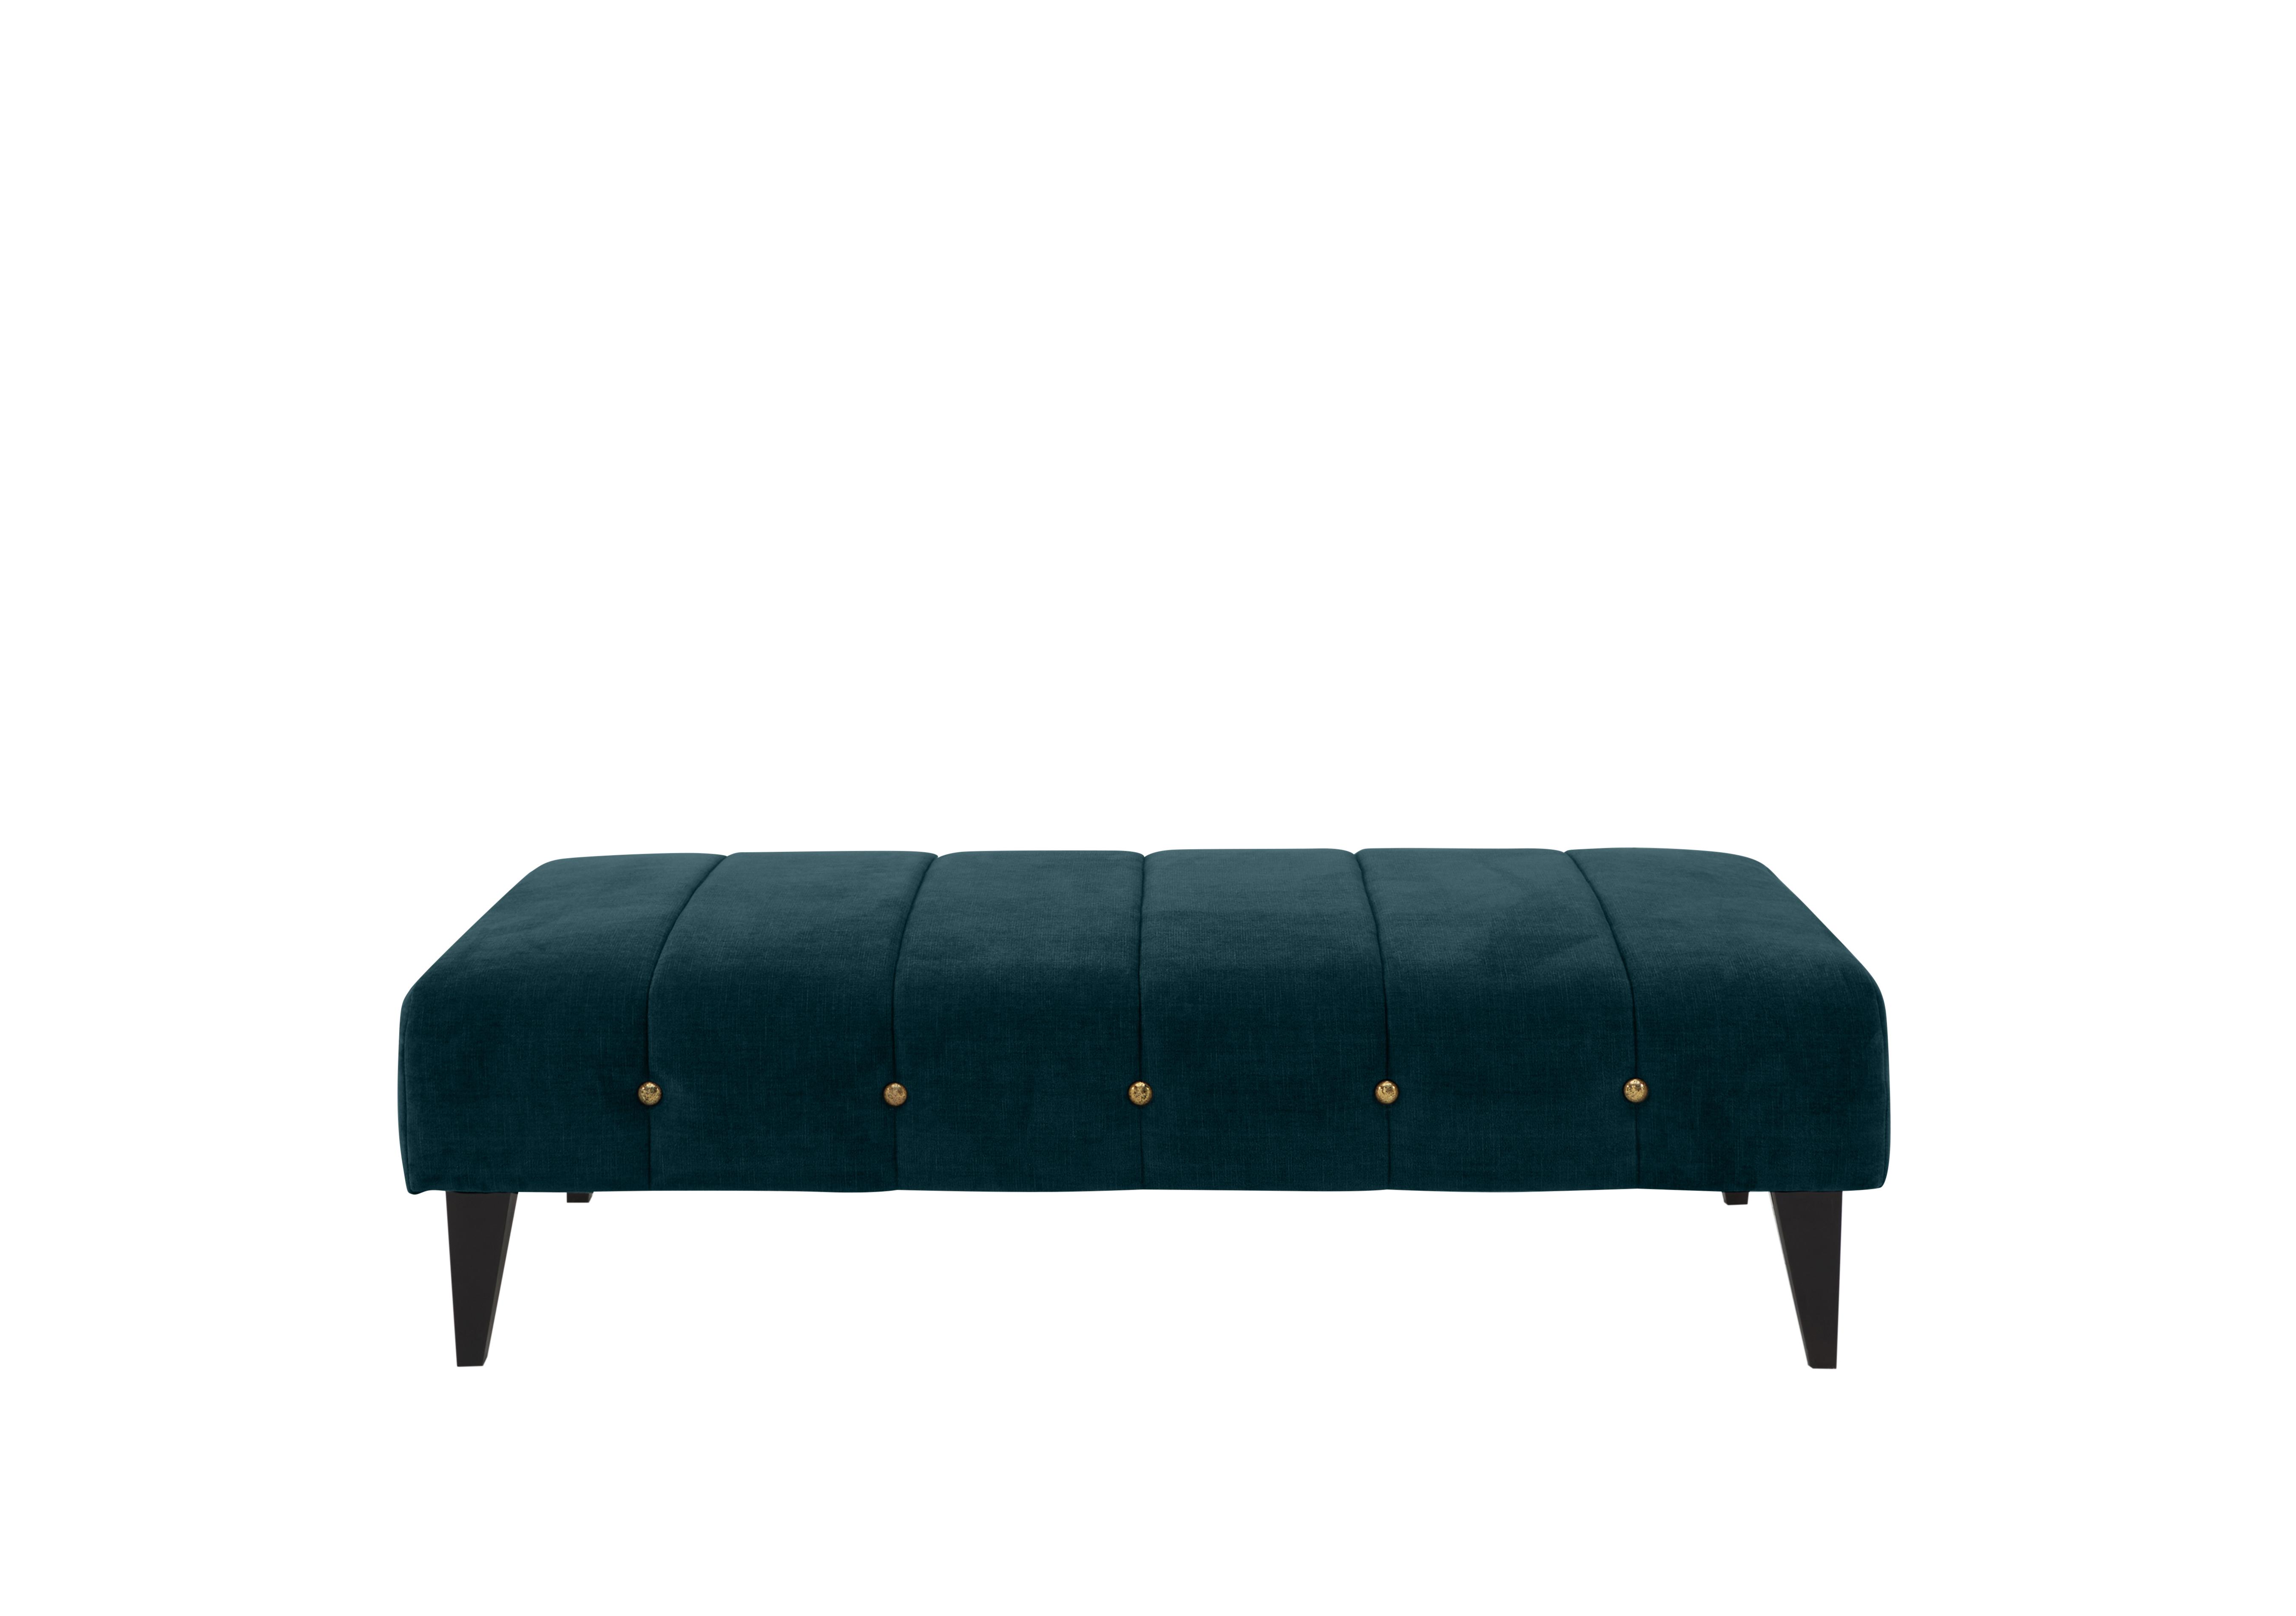 Sumptuous Fabric Bench Footstool in Chamonix Teal Dk/Gold on Furniture Village